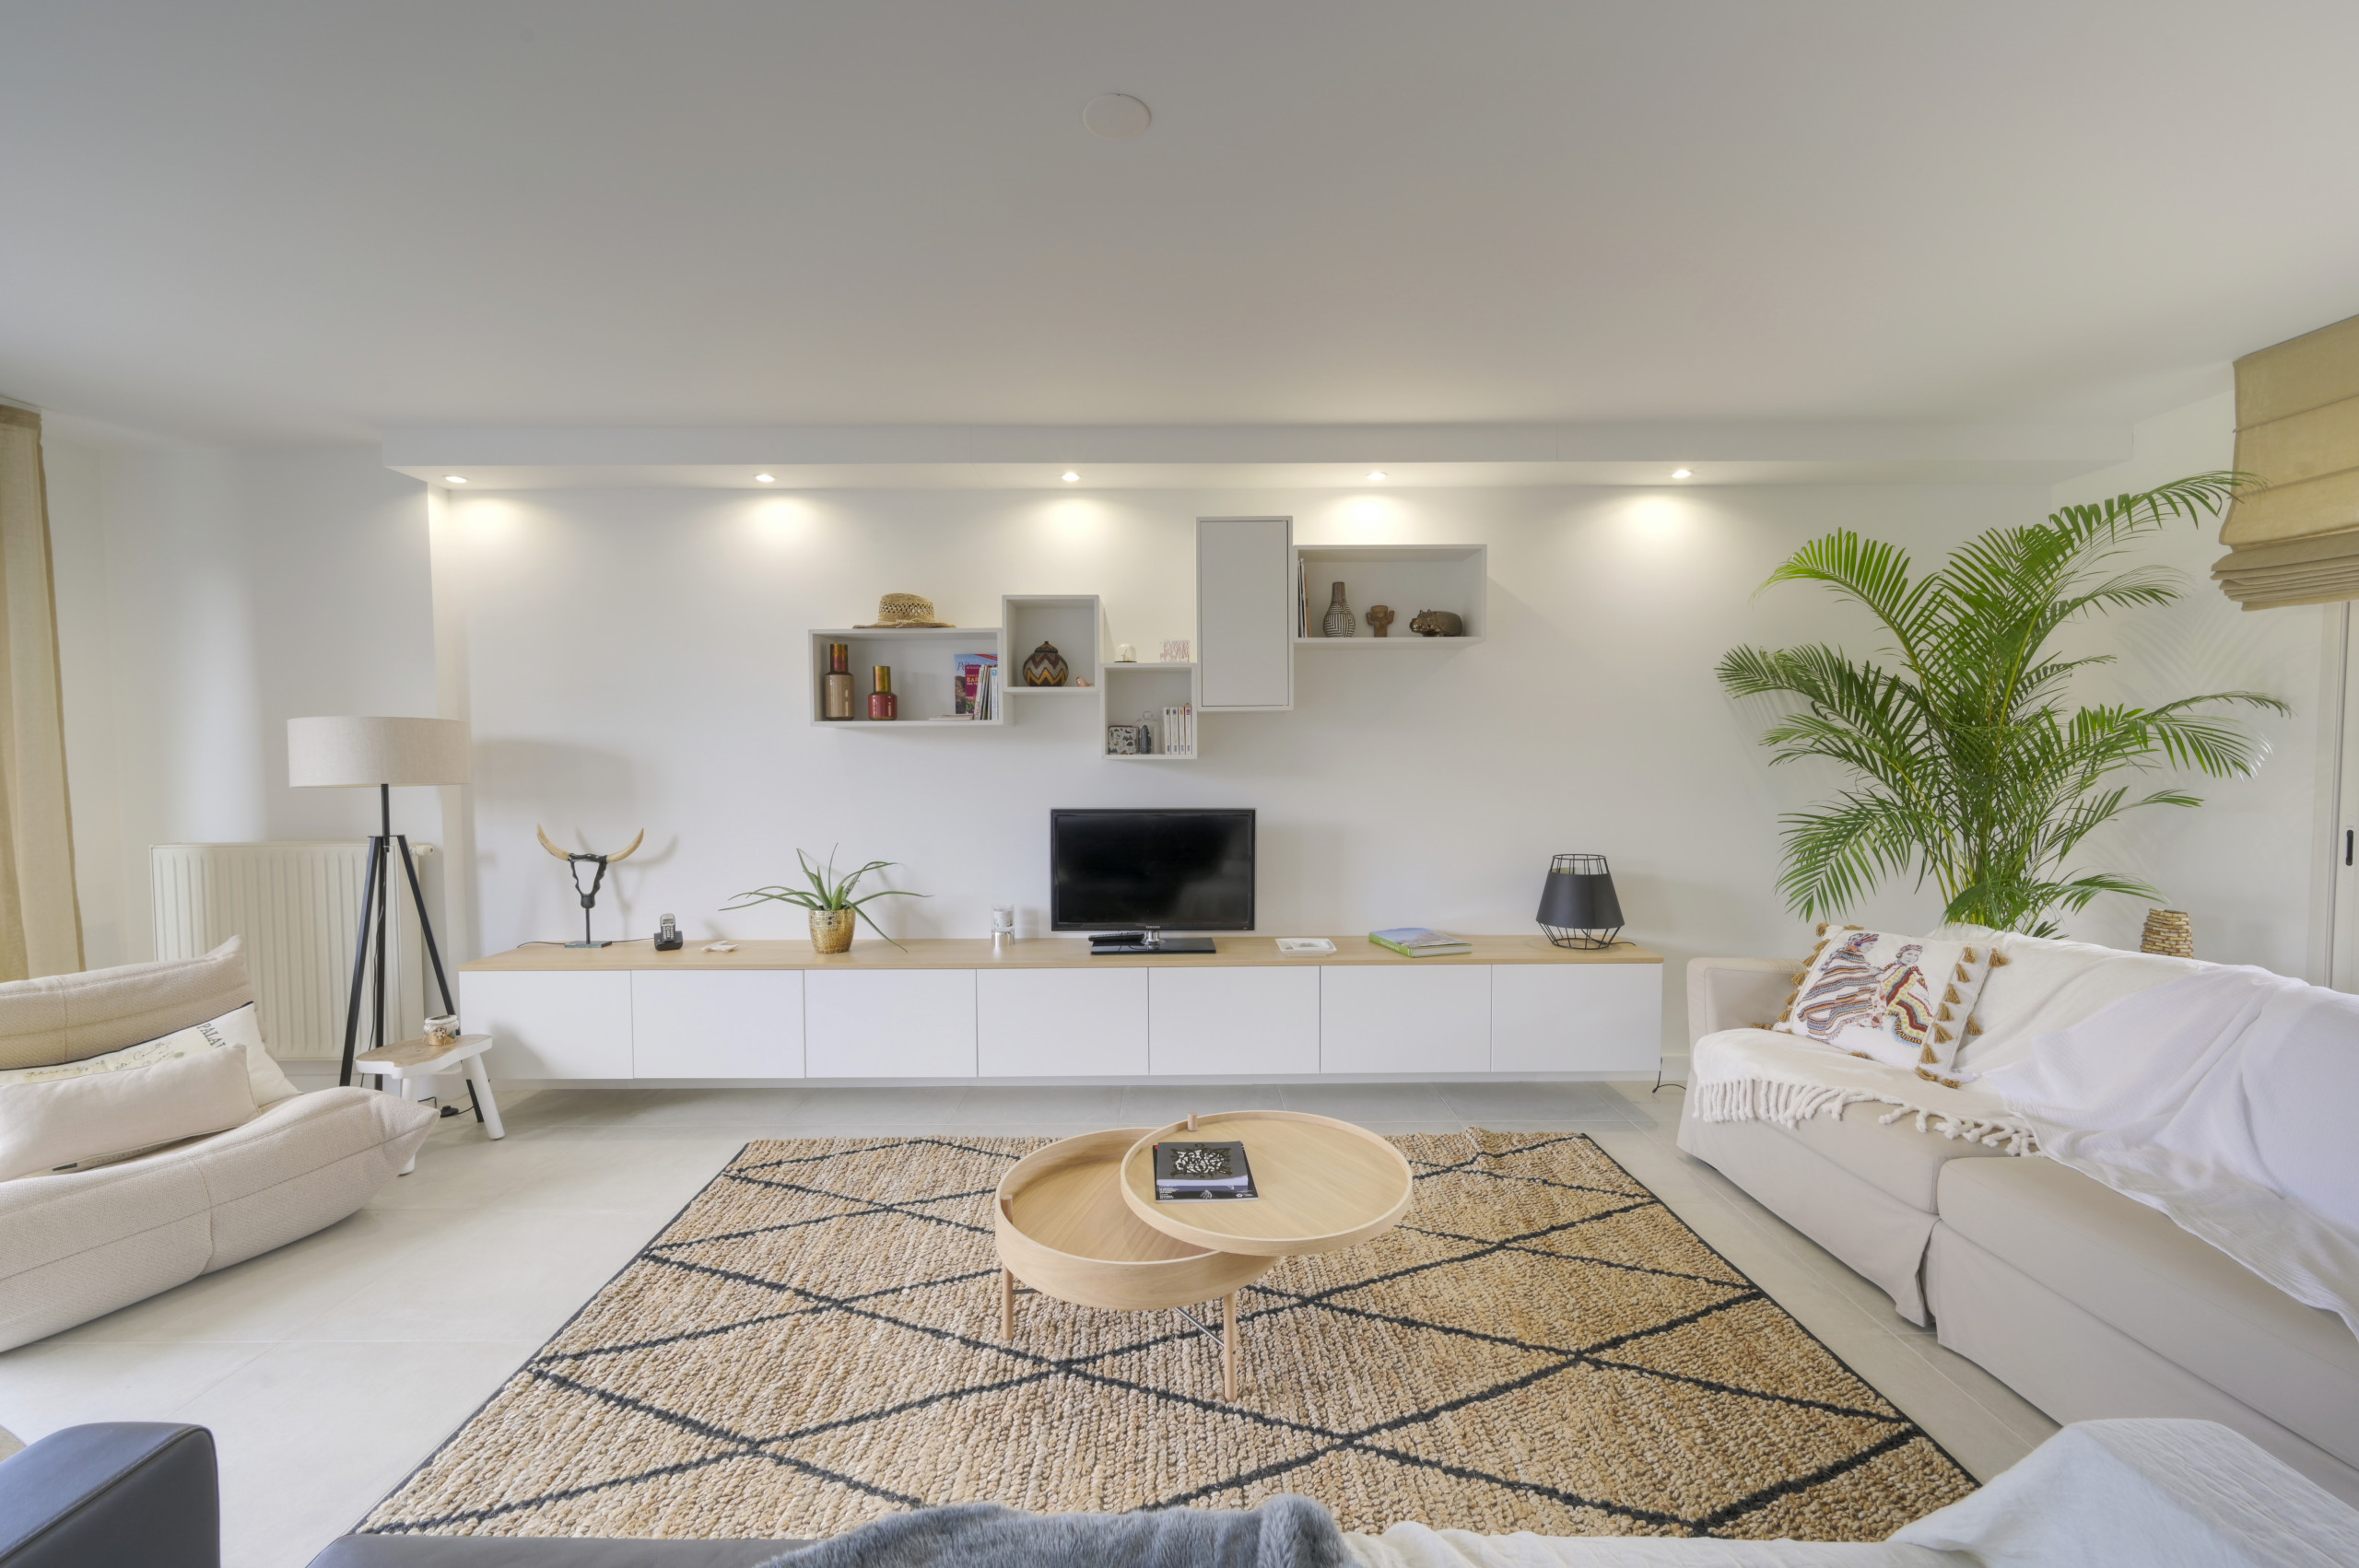 75 Ceramic Tile Living Room Ideas You'Ll Love - May, 2023 | Houzz